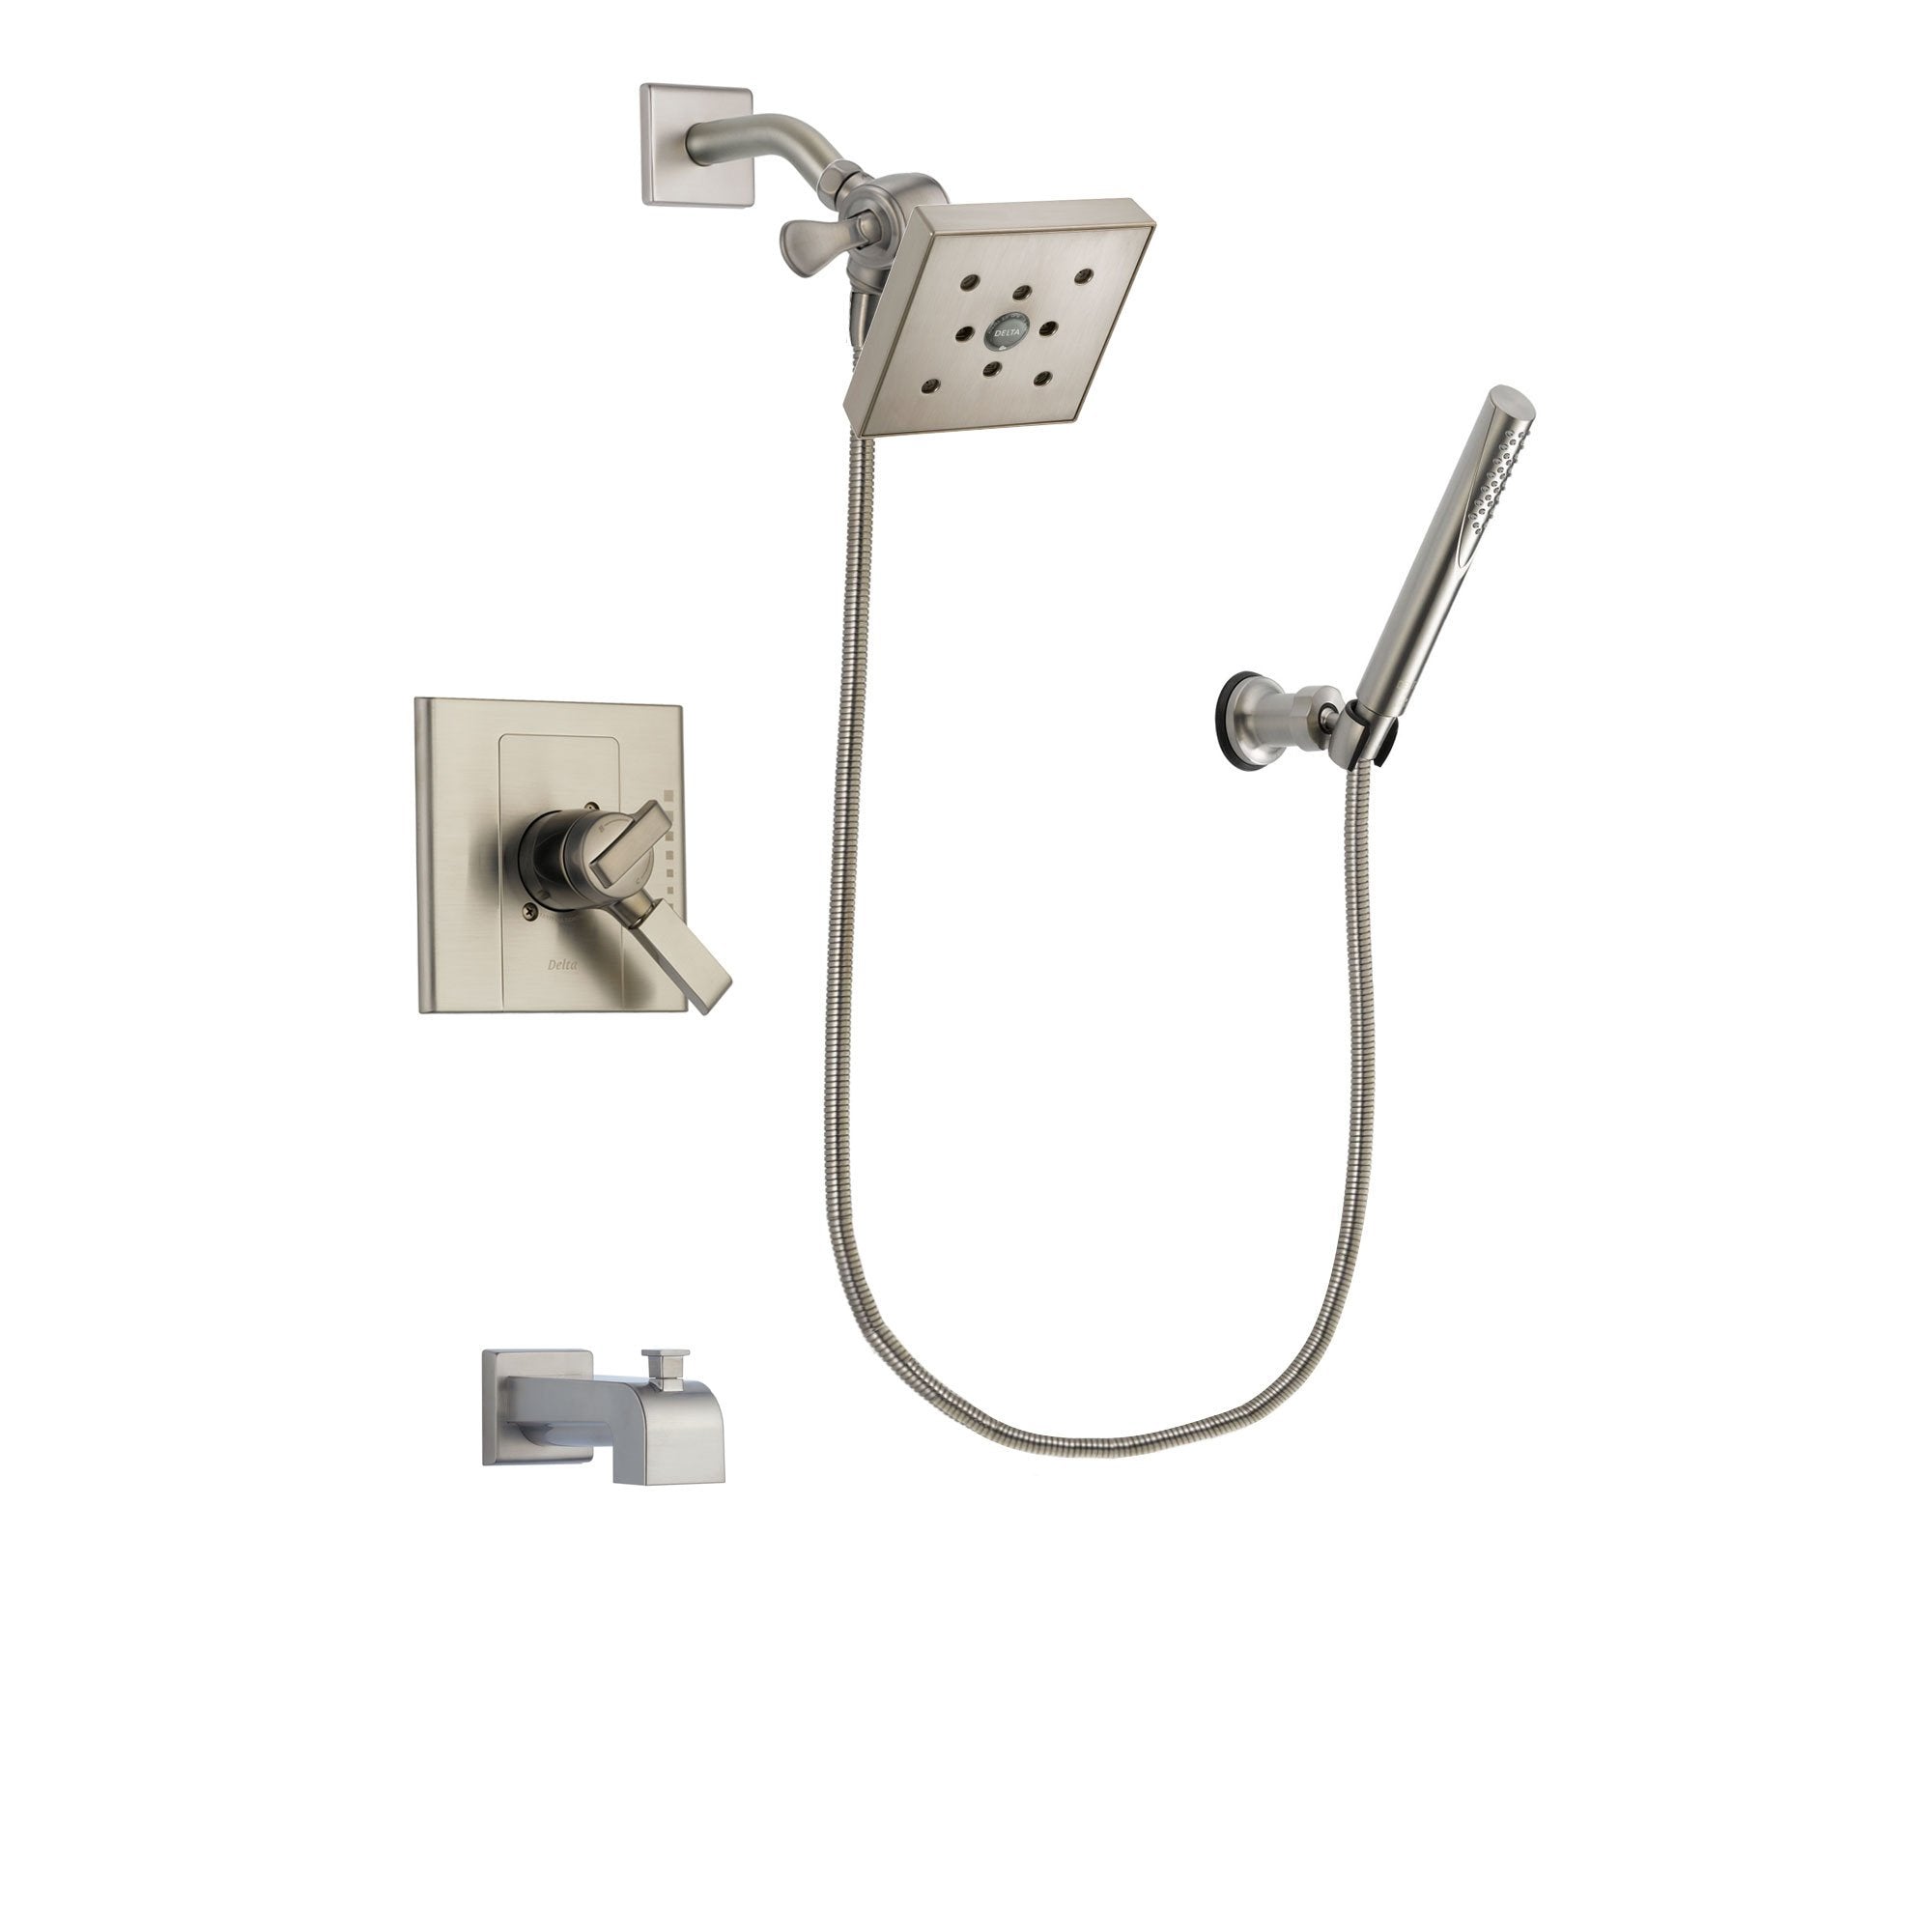 Delta Arzo Stainless Steel Finish Dual Control Tub and Shower Faucet System Package with Square Shower Head and Modern Handheld Shower Spray Includes Rough-in Valve and Tub Spout DSP2163V